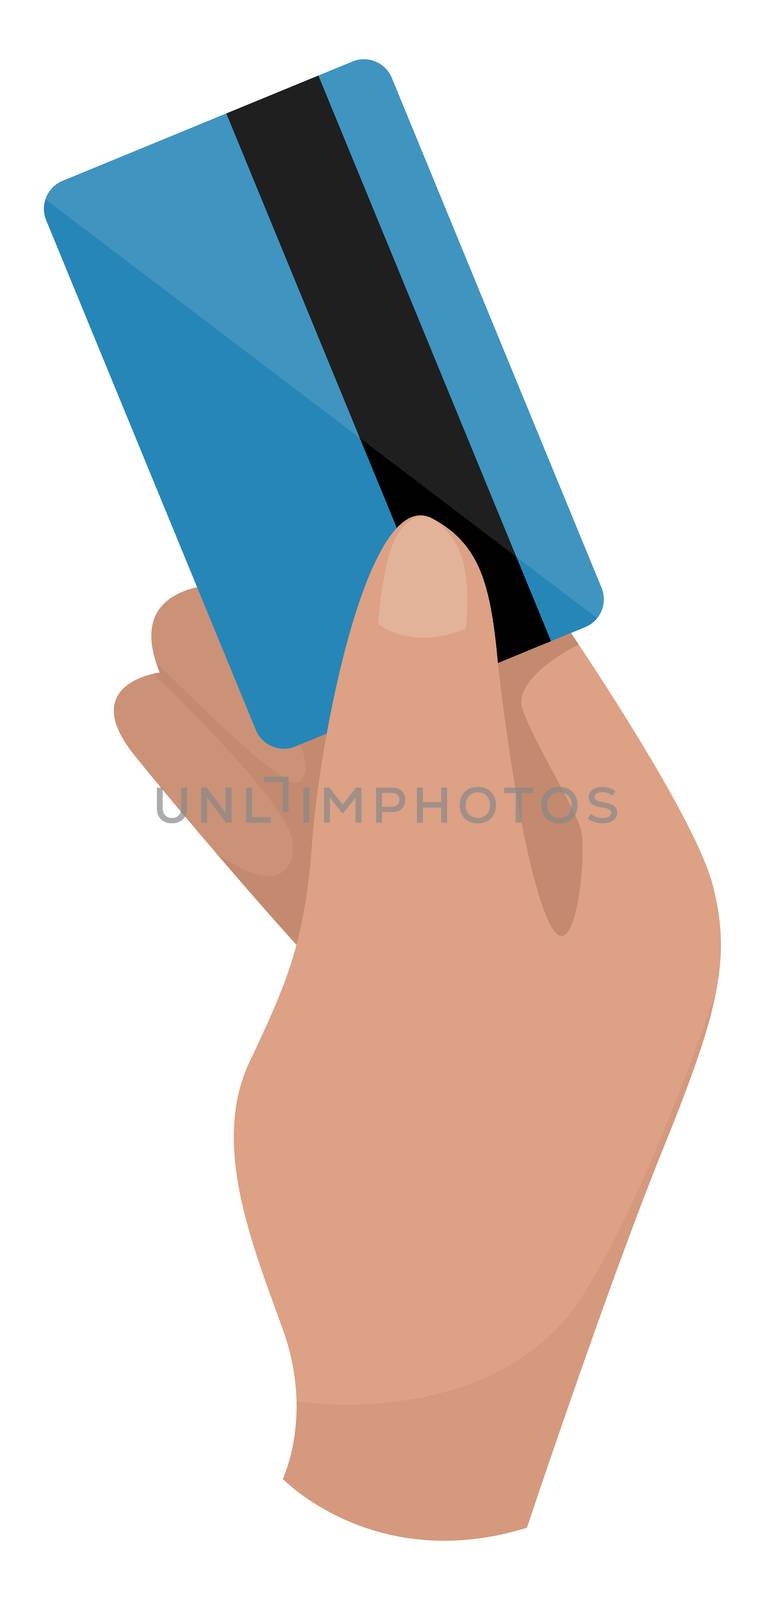 Credit card, illustration, vector on white background by Morphart